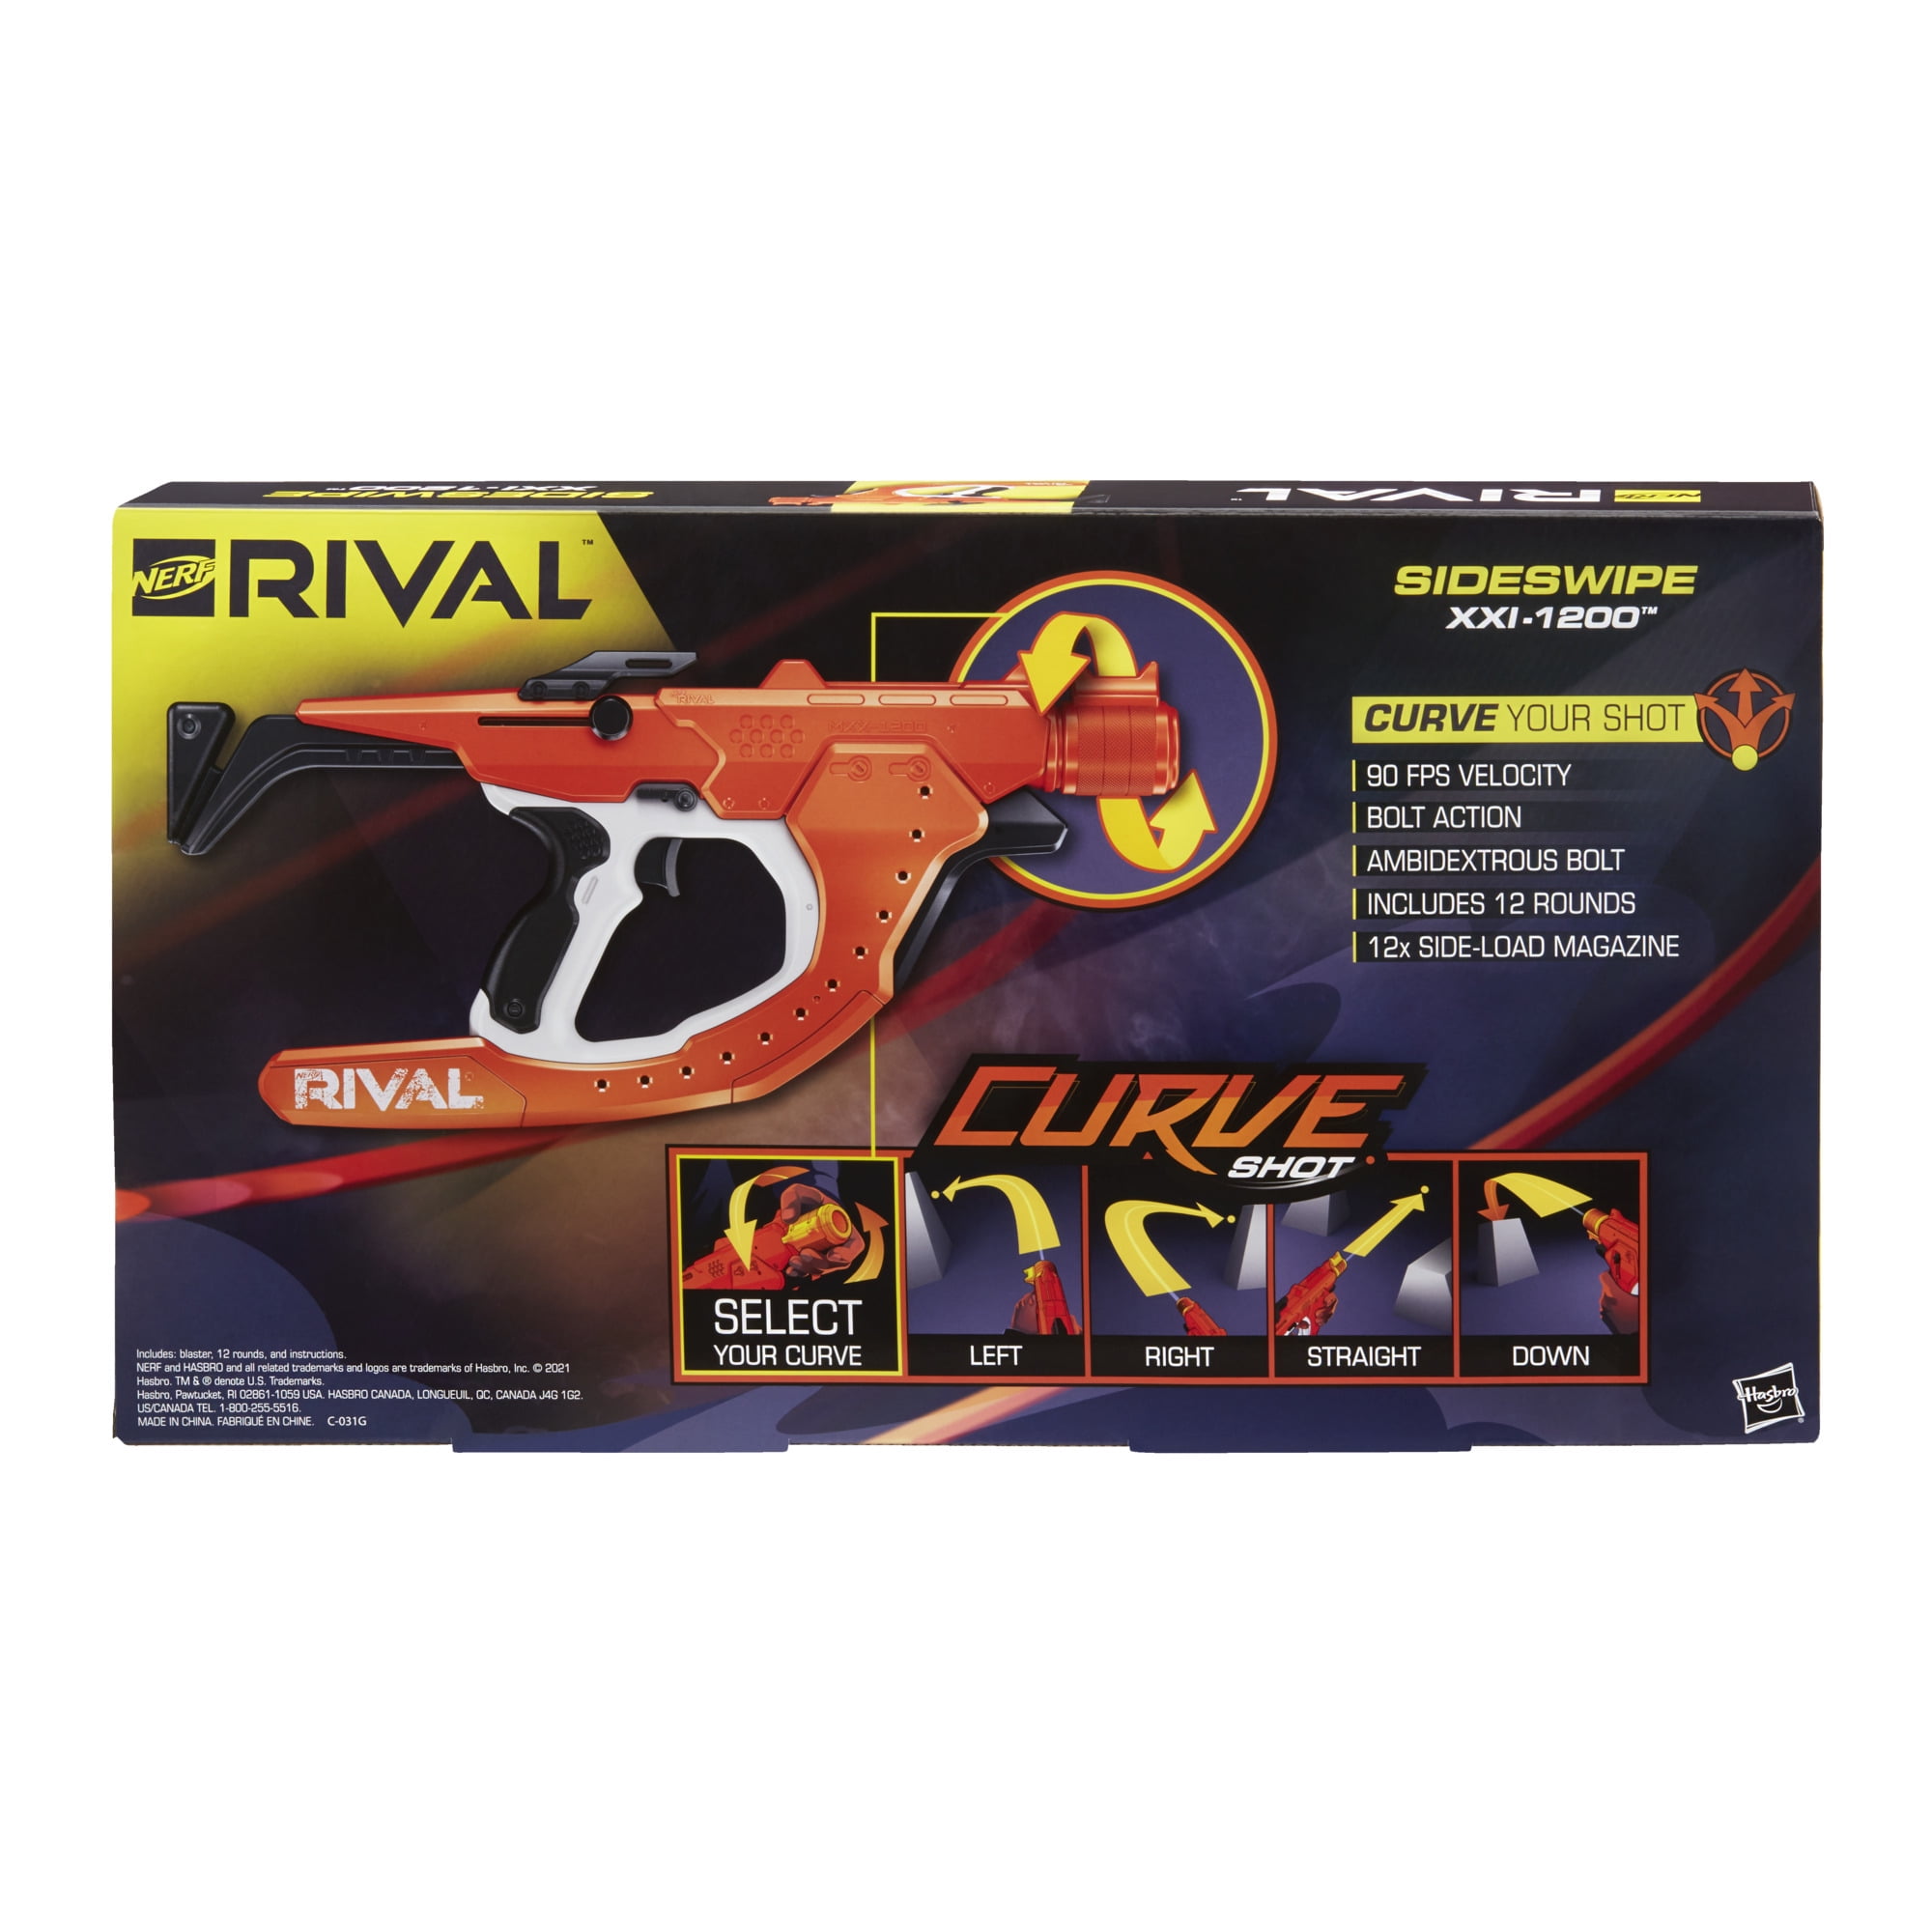 Nerf Rival Curve Shot Sideswipe XXI-1200 Blaster and 12 Nerf Rival Rounds 